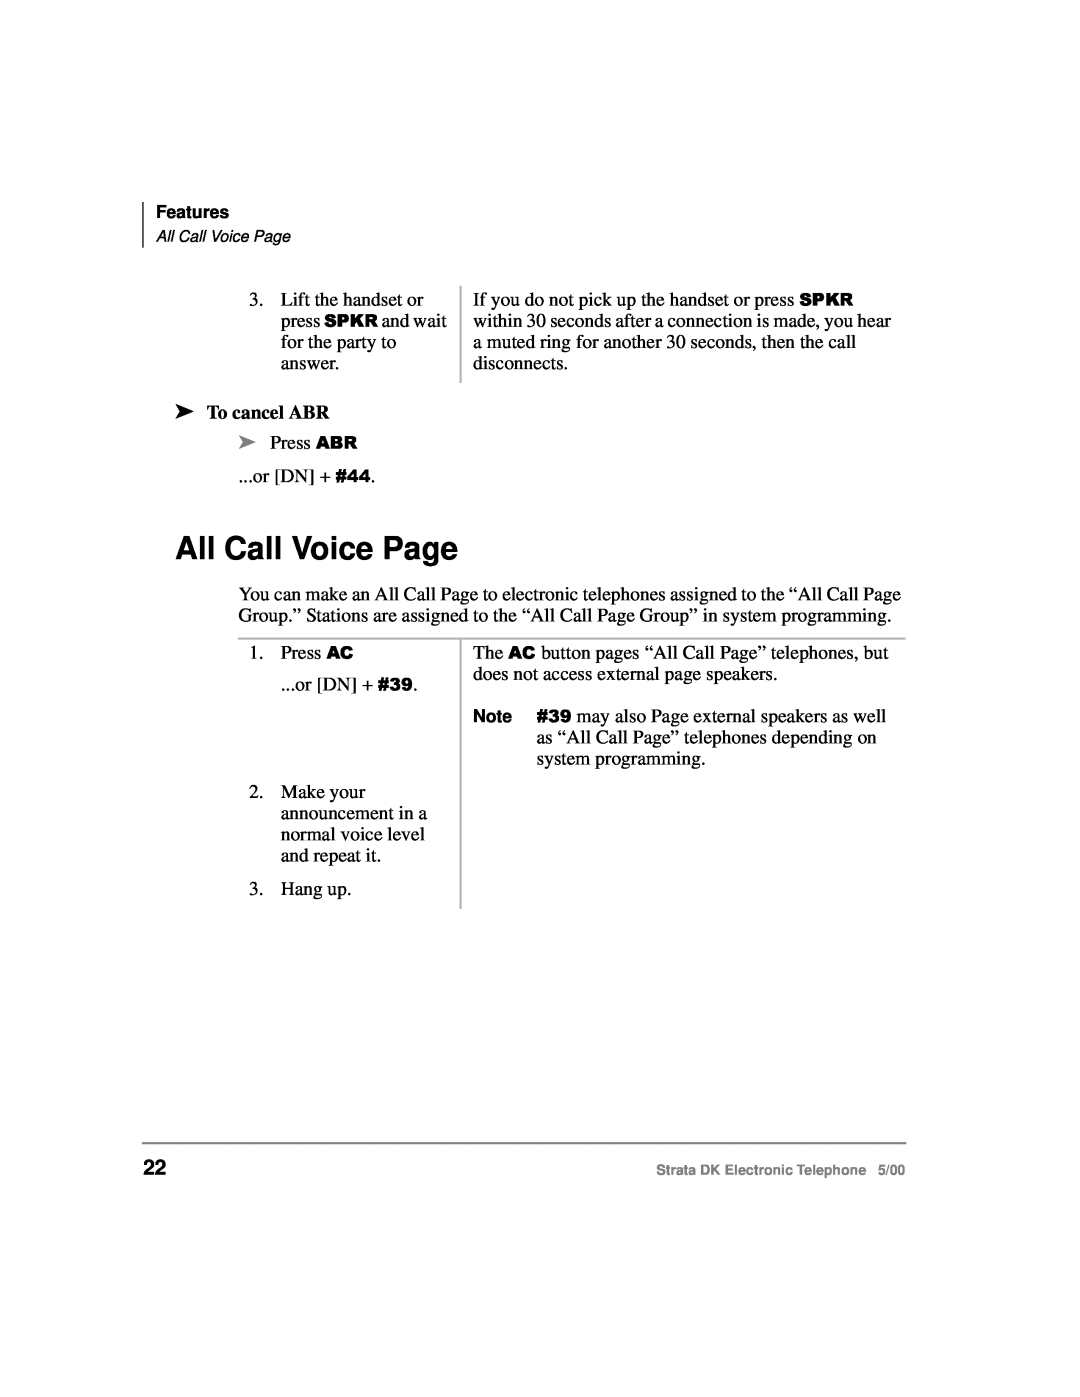 Toshiba Strata DK manual All Call Voice Page, To cancel ABR 